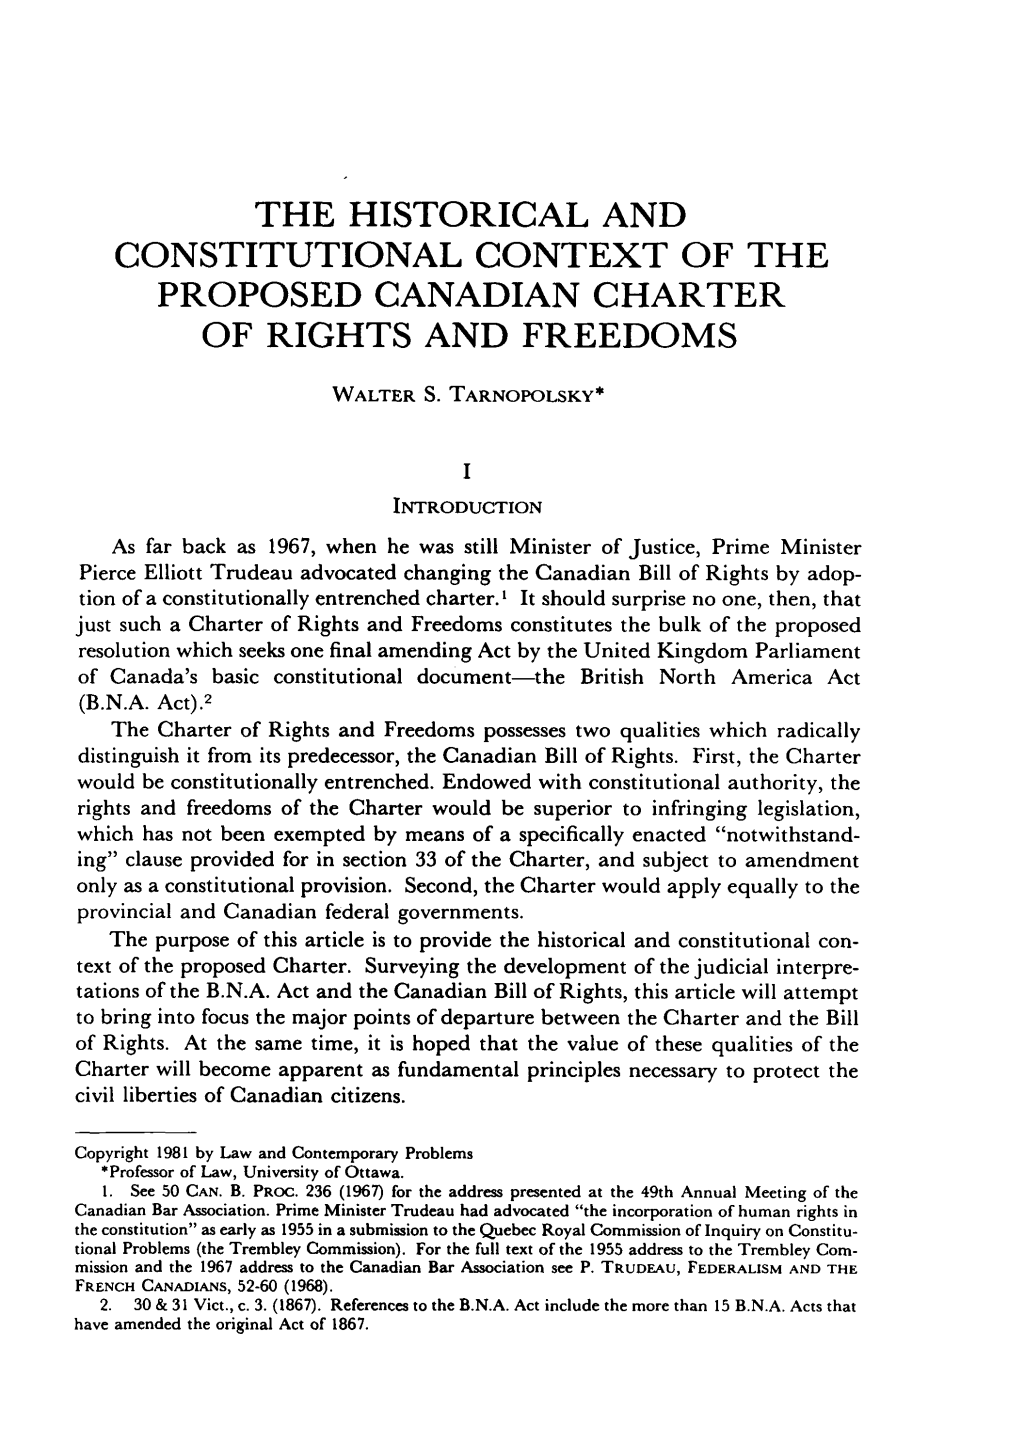 The Historical and Constitutional Context of the Proposed Canadian Charter of Rights and Freedoms